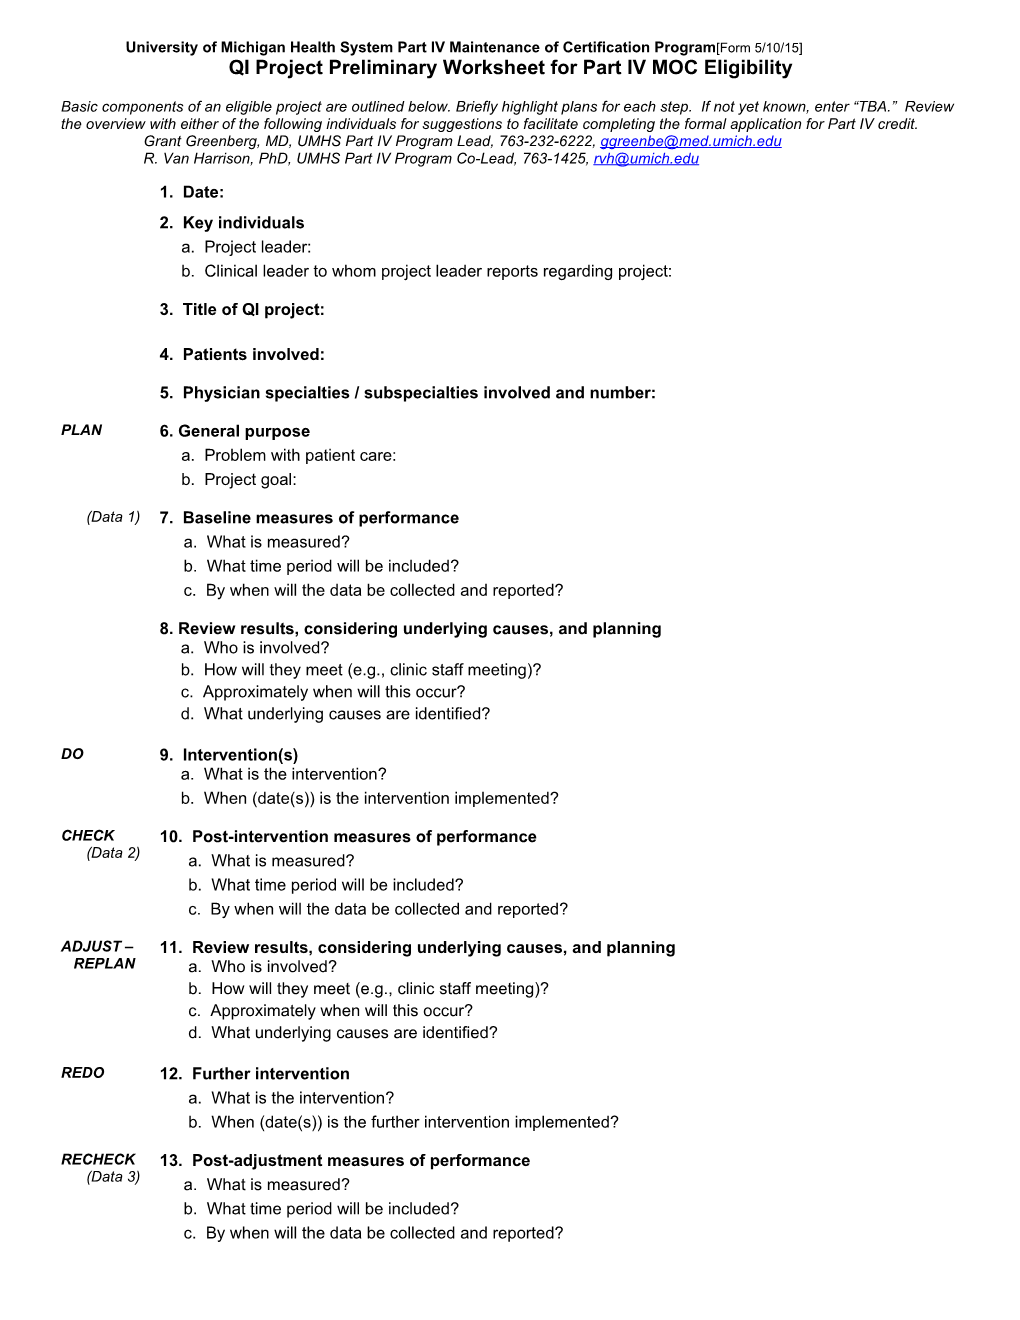 QI Project Preliminary Worksheet for Part IV MOC Eligibility